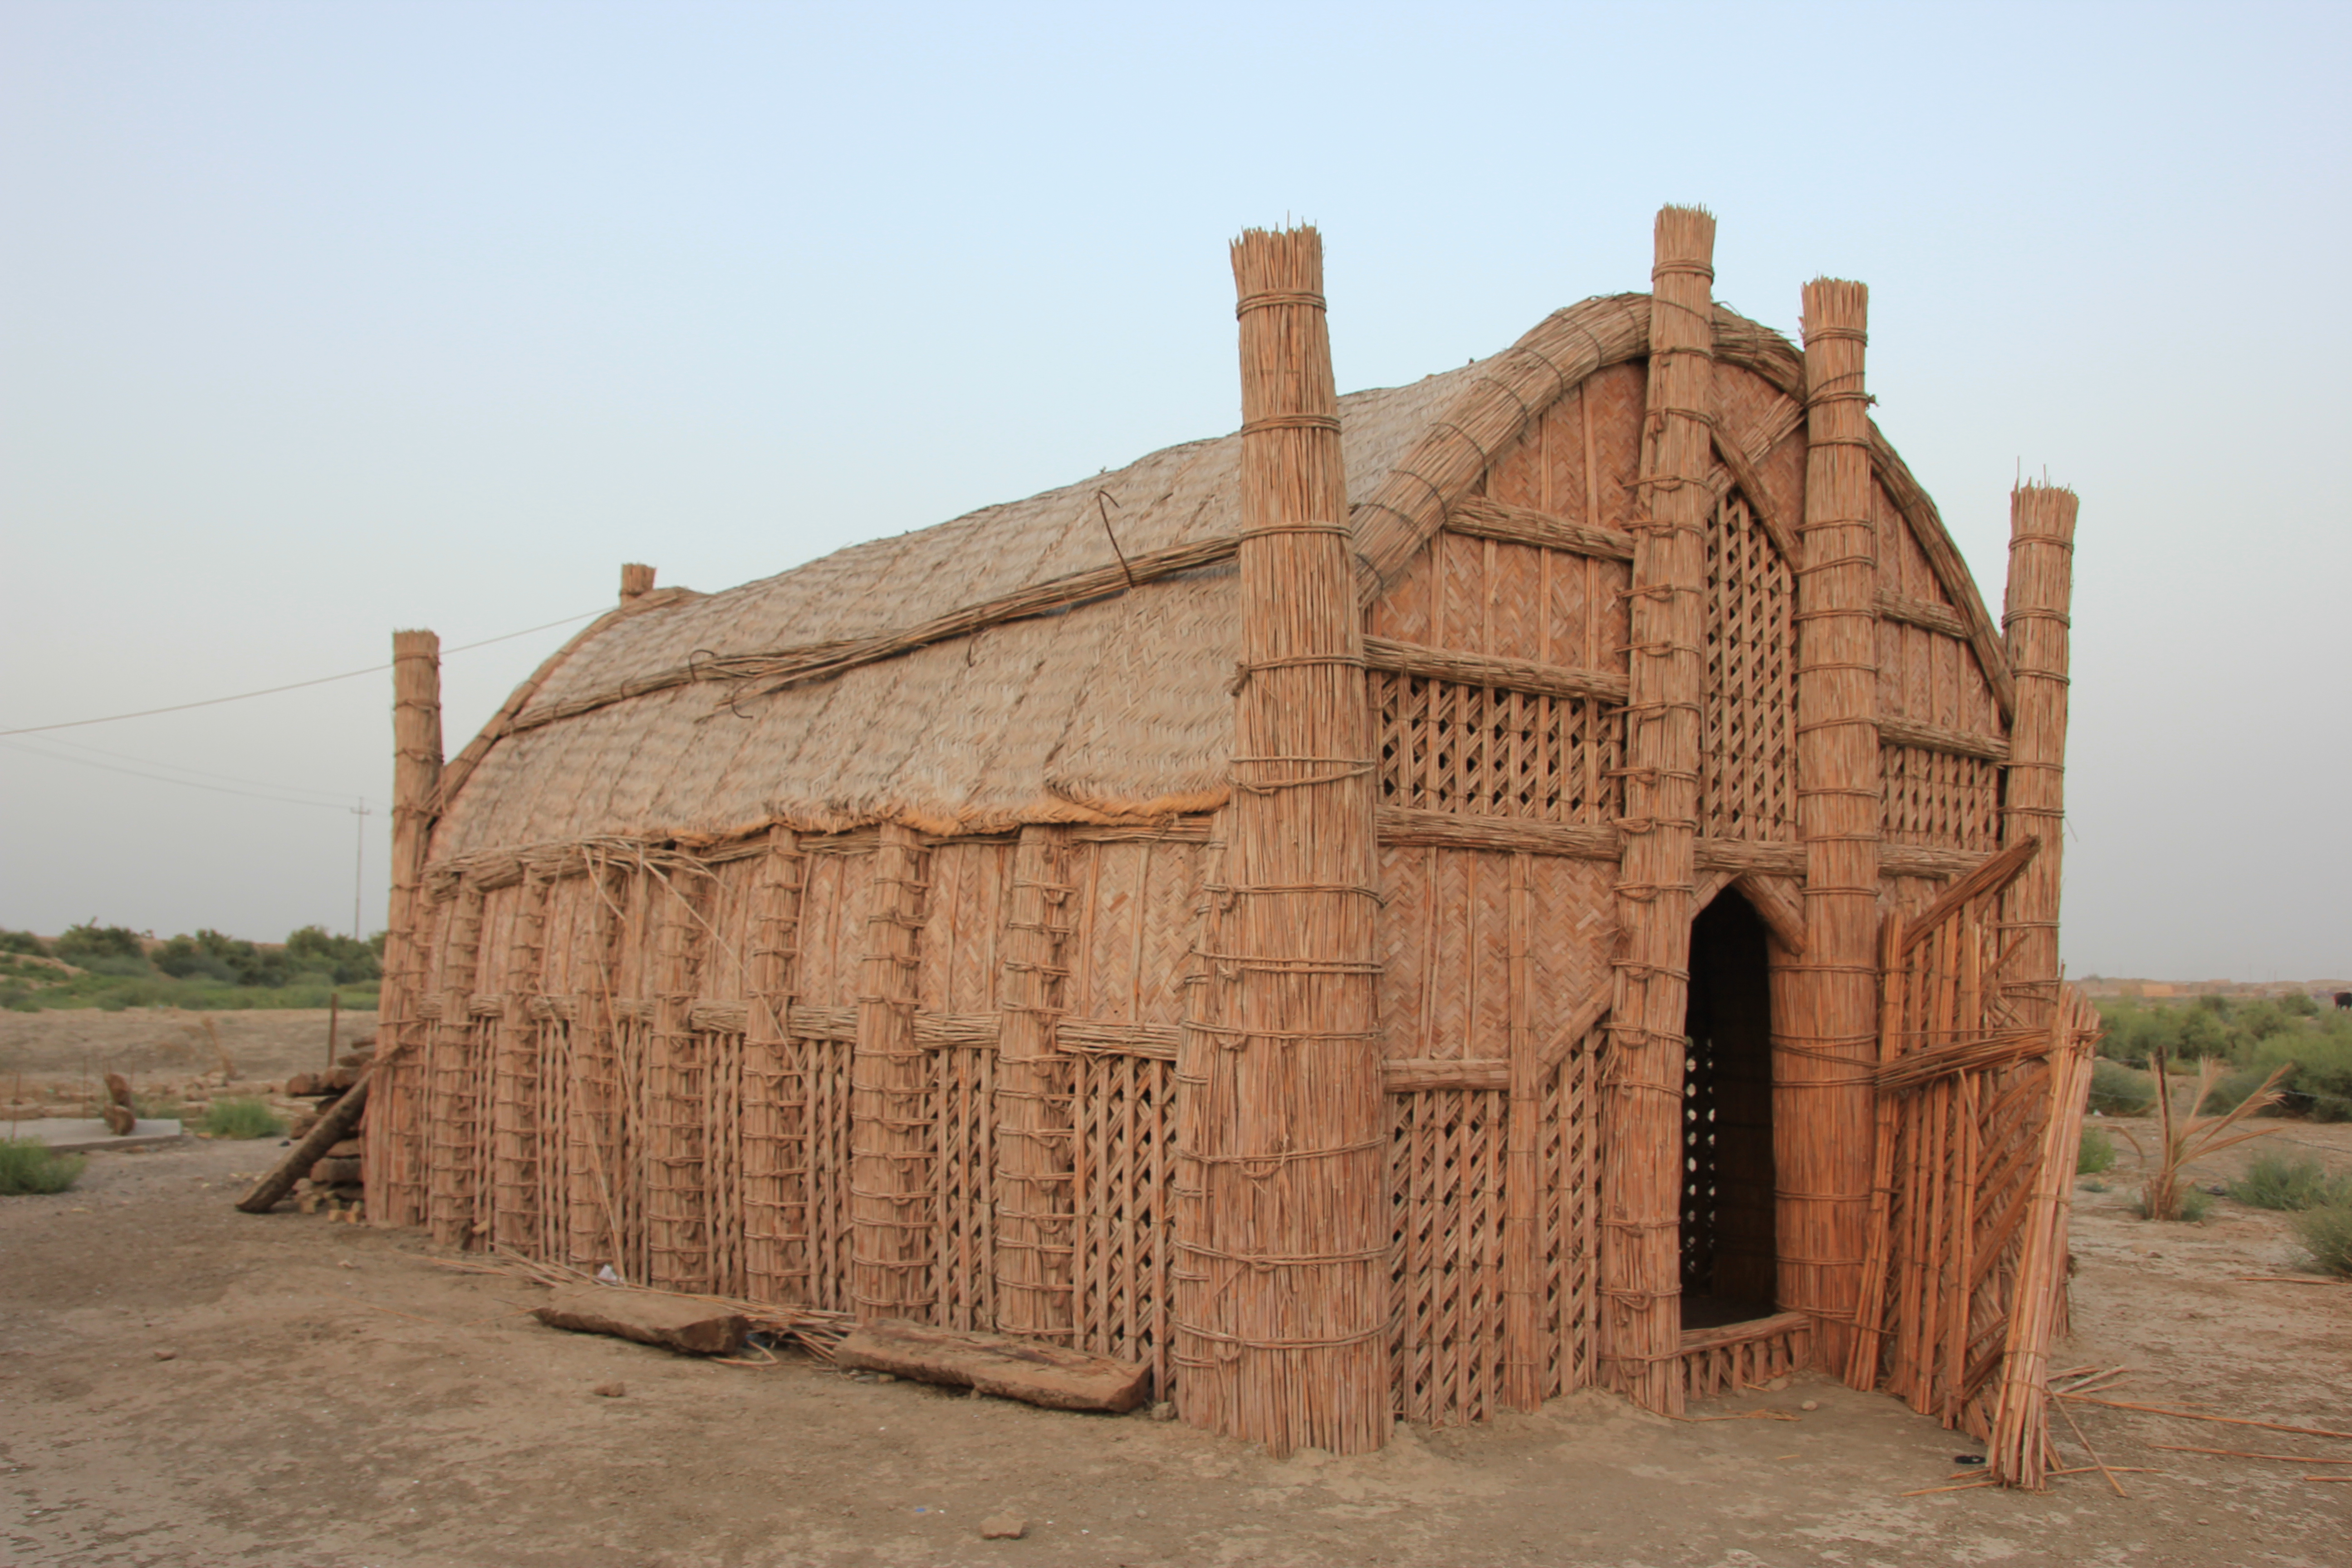 a long hall structure made of bundled reeds